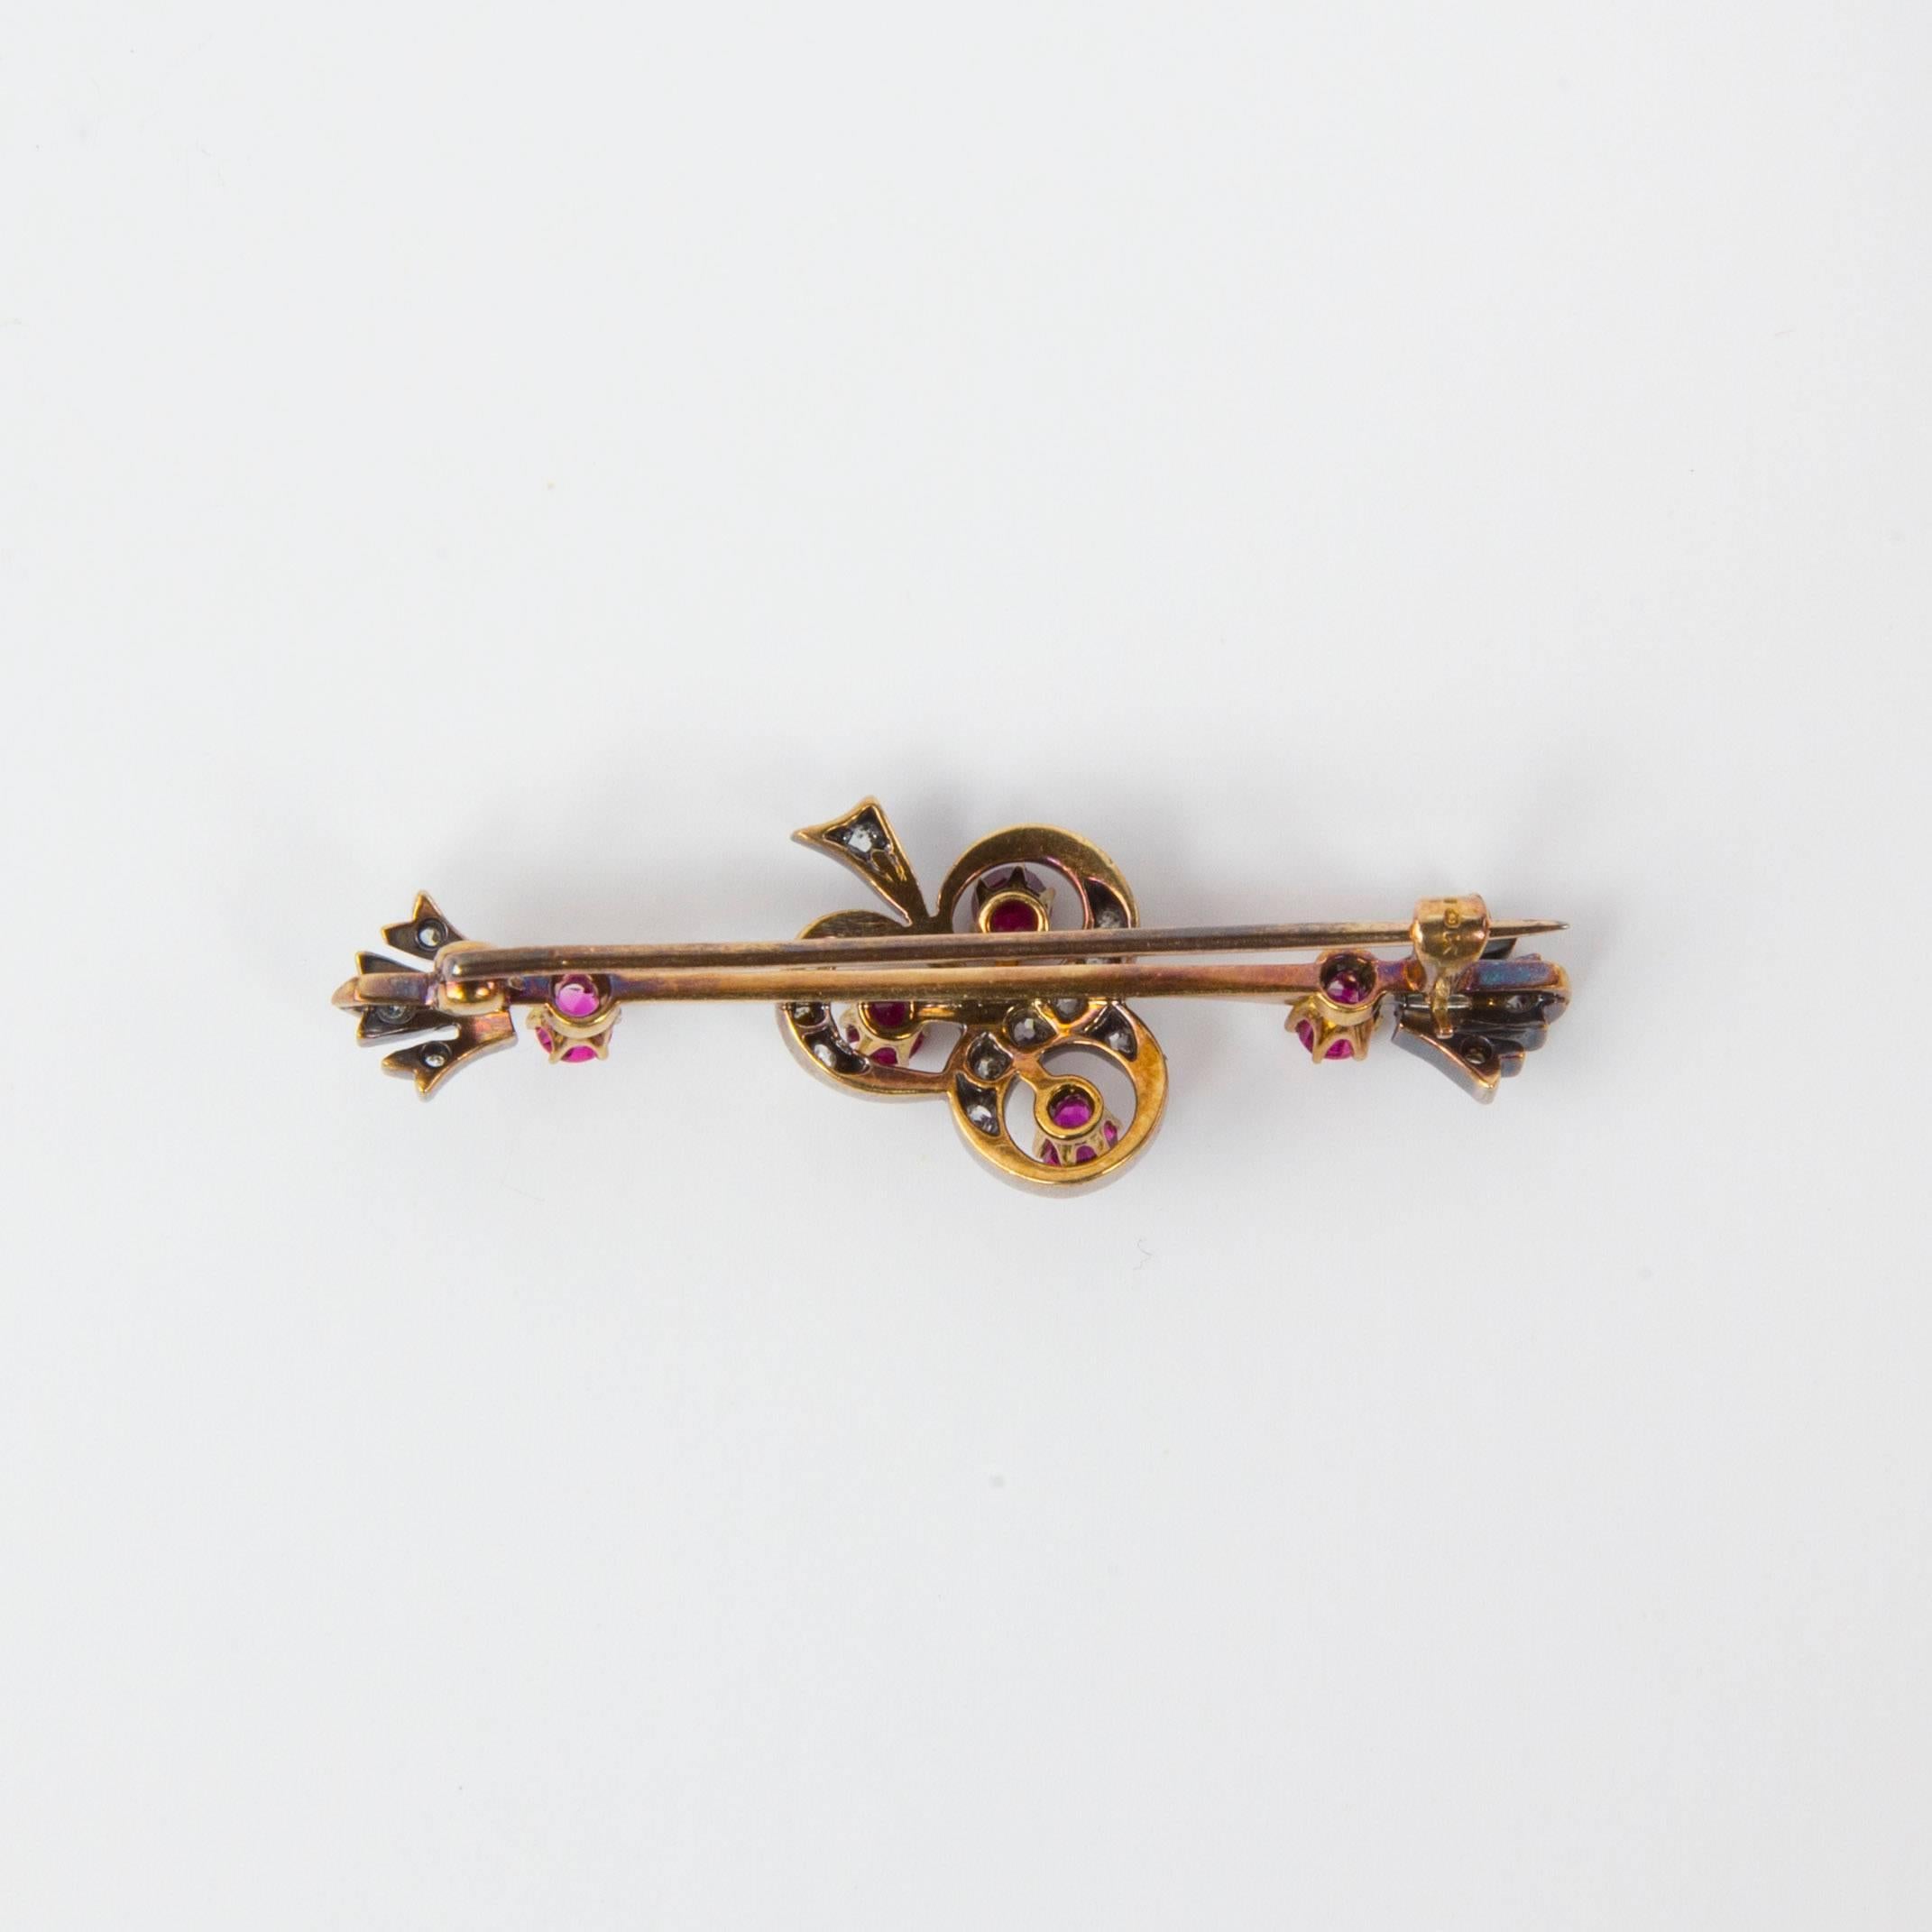 Beautiful Edwardian Bar Pin centered by a Shamrock set with 3 Rubies and surrounded by sparkly rose cut Diamonds and at the ends set with decorative Ruby and Diamond motifs; hand crafted in Gold and Silver; circa 1900-1910;  and is in lovely